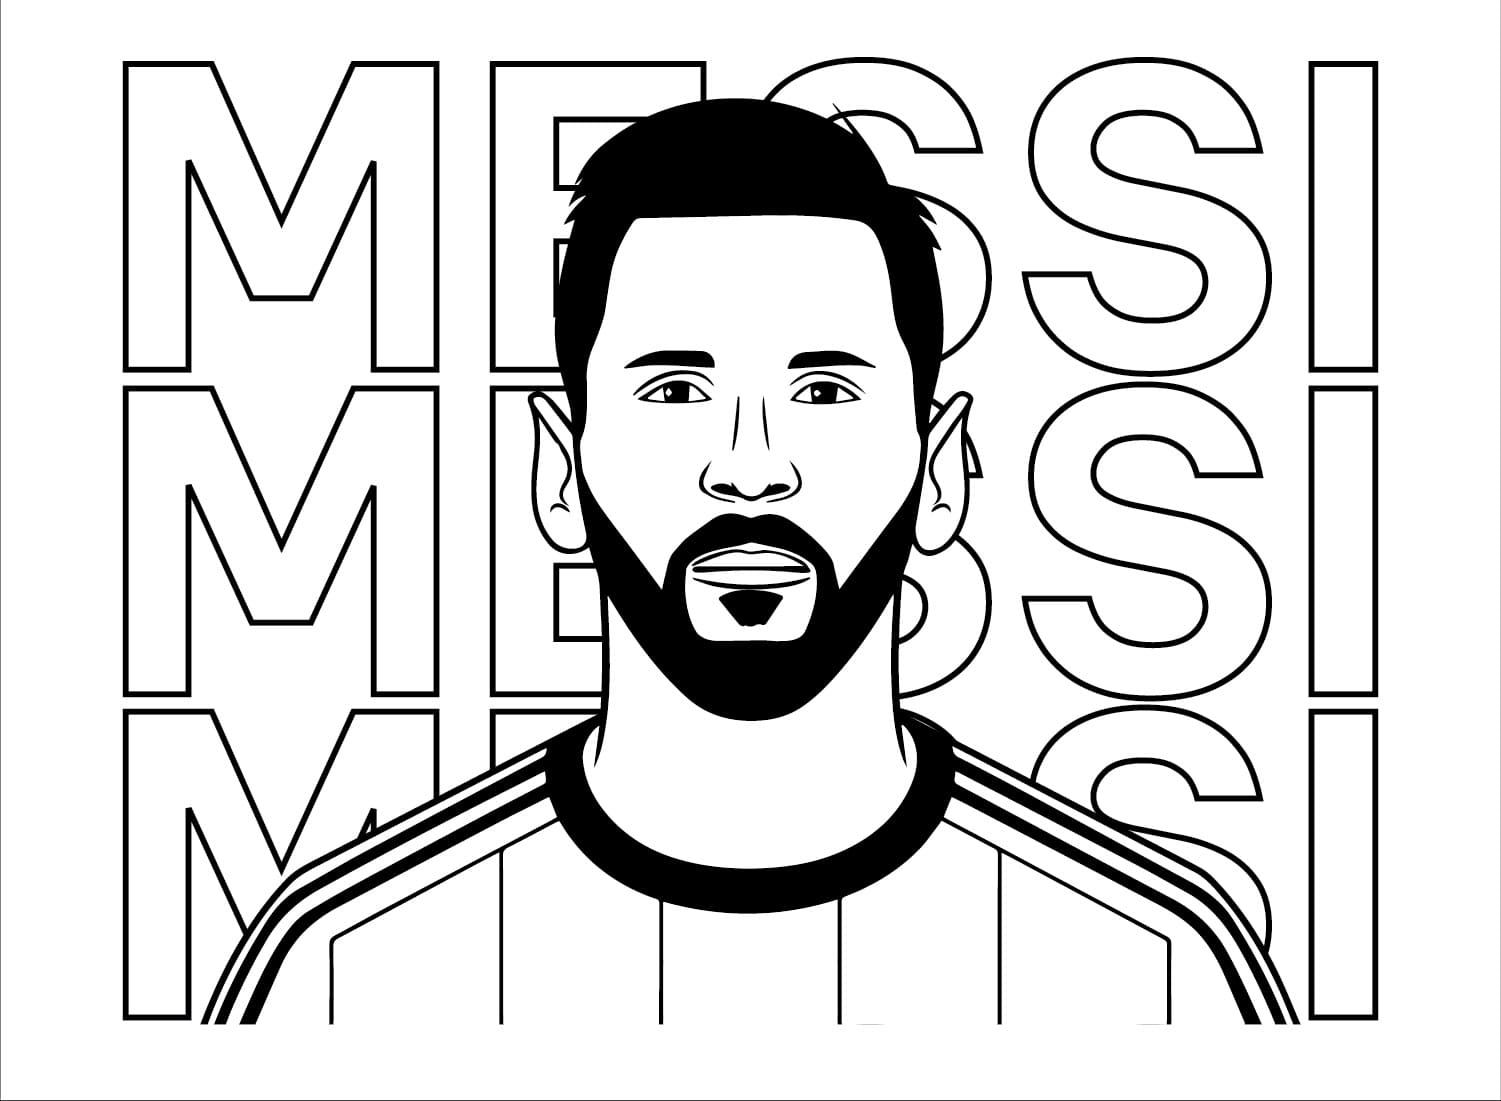 Amazing Messi coloring page - Download, Print or Color Online for Free